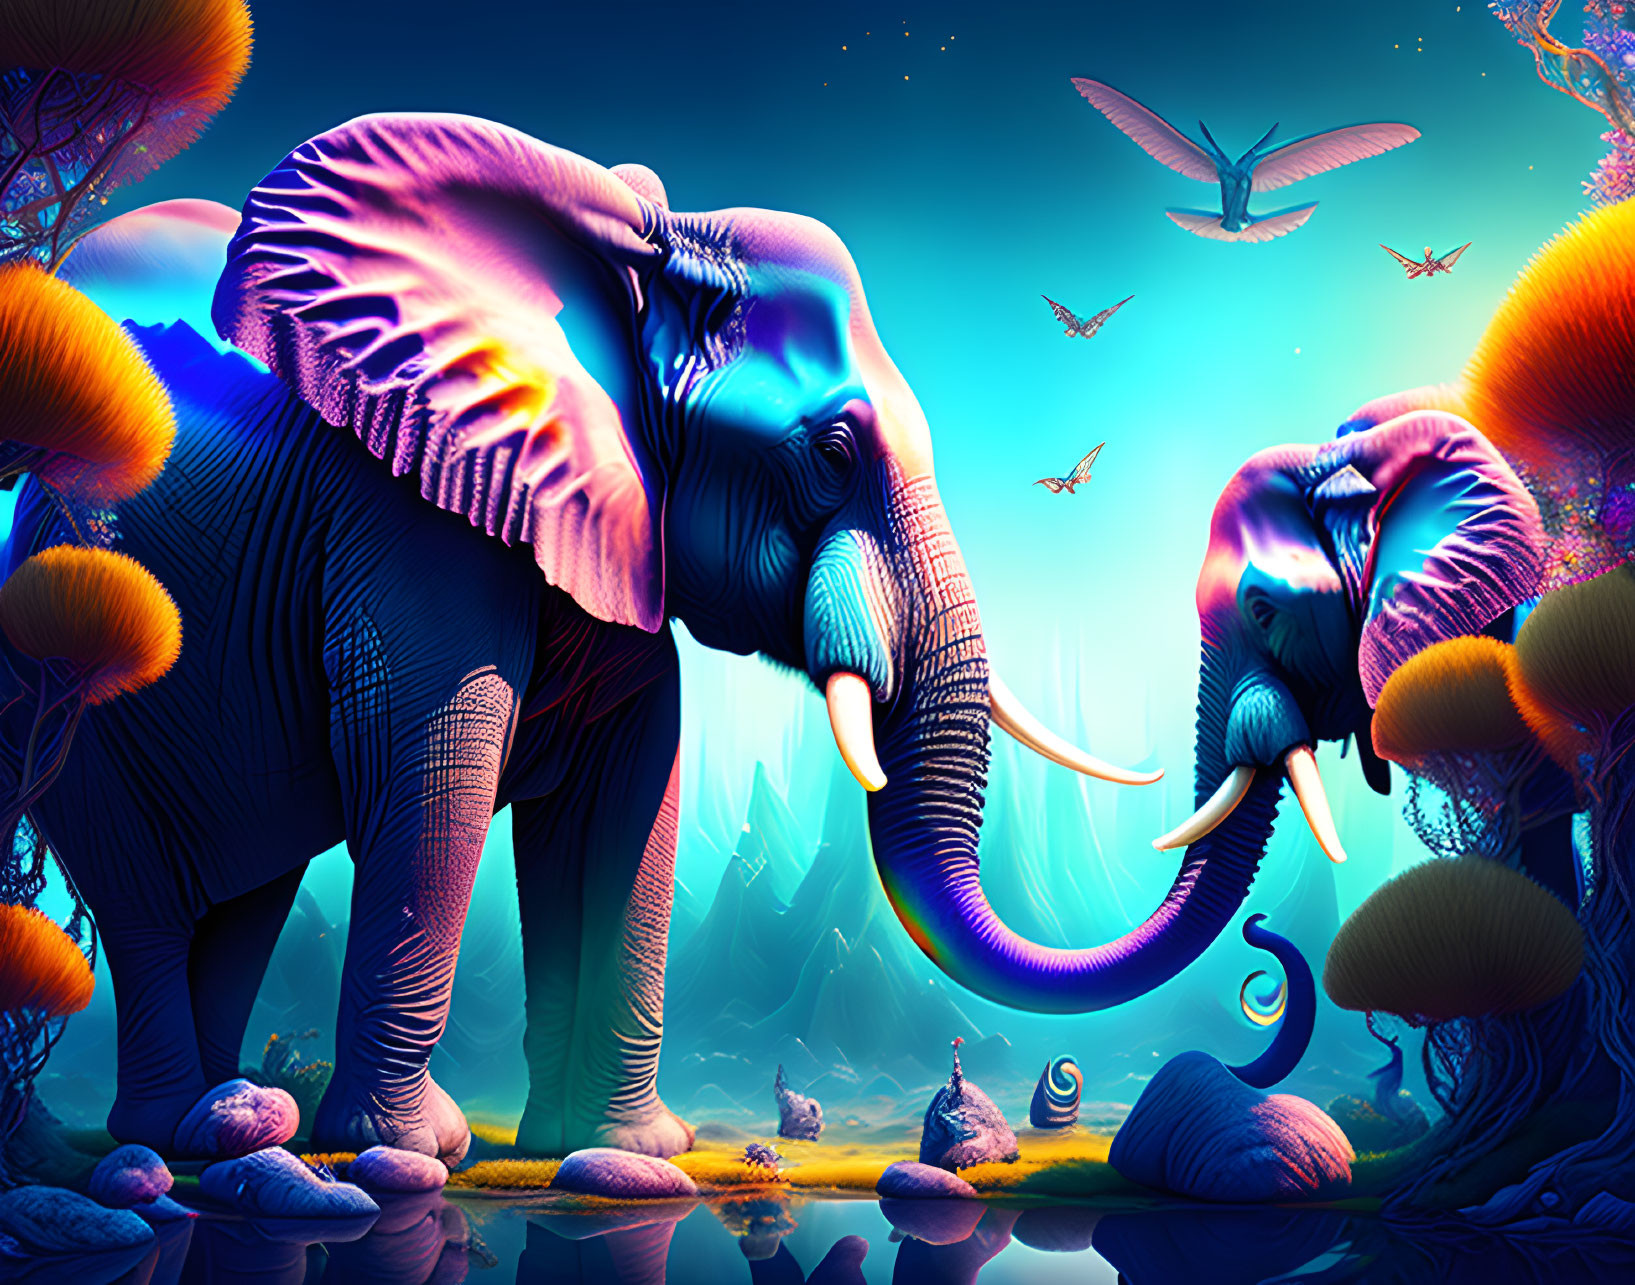 Vibrant surreal landscape with elephants, glowing mushrooms, plants, and butterflies